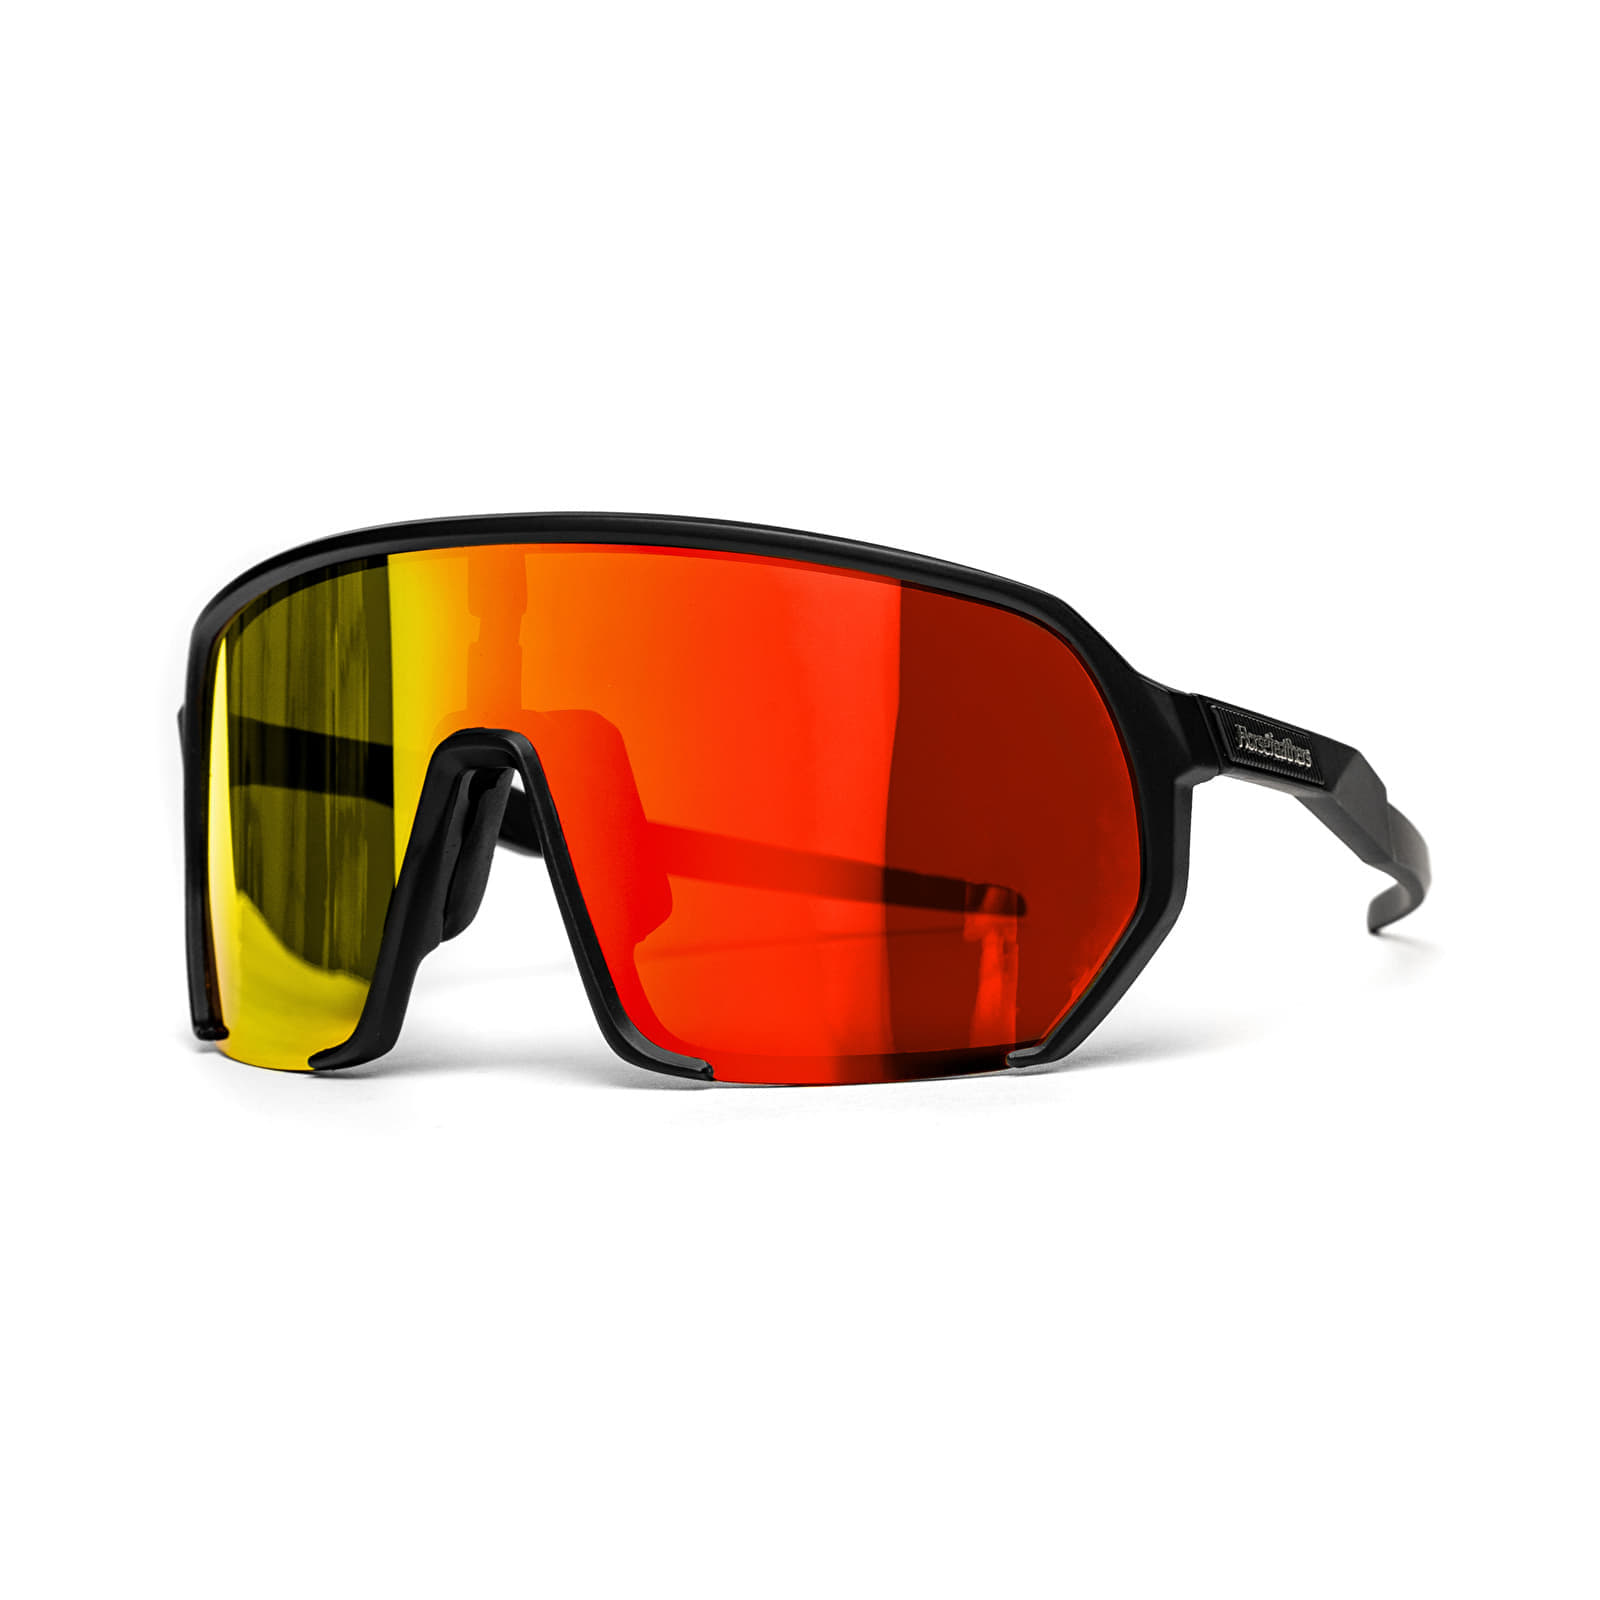 Horsefeathers Archie Bike Sunglasses Black/ Mirror Red